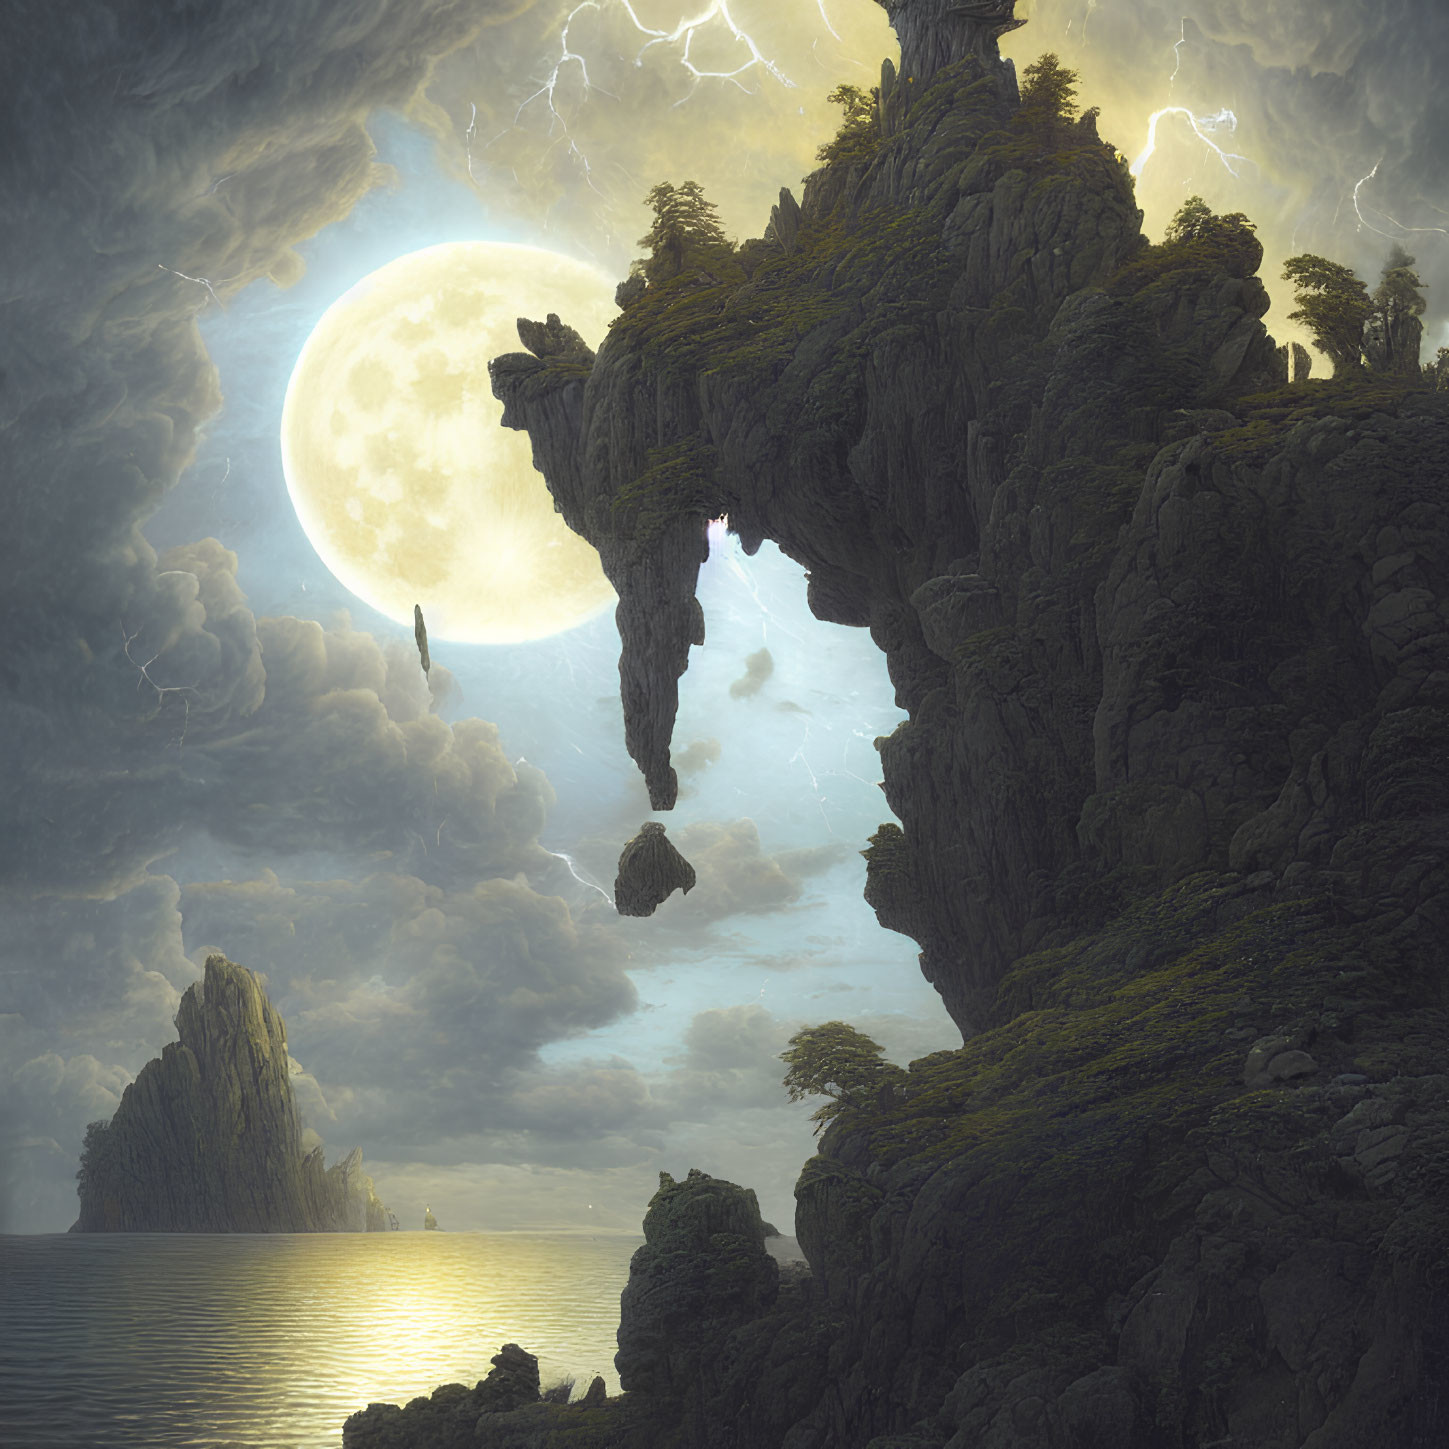 Fantastical landscape with towering cliffs, giant moon, lightning, and floating rock.